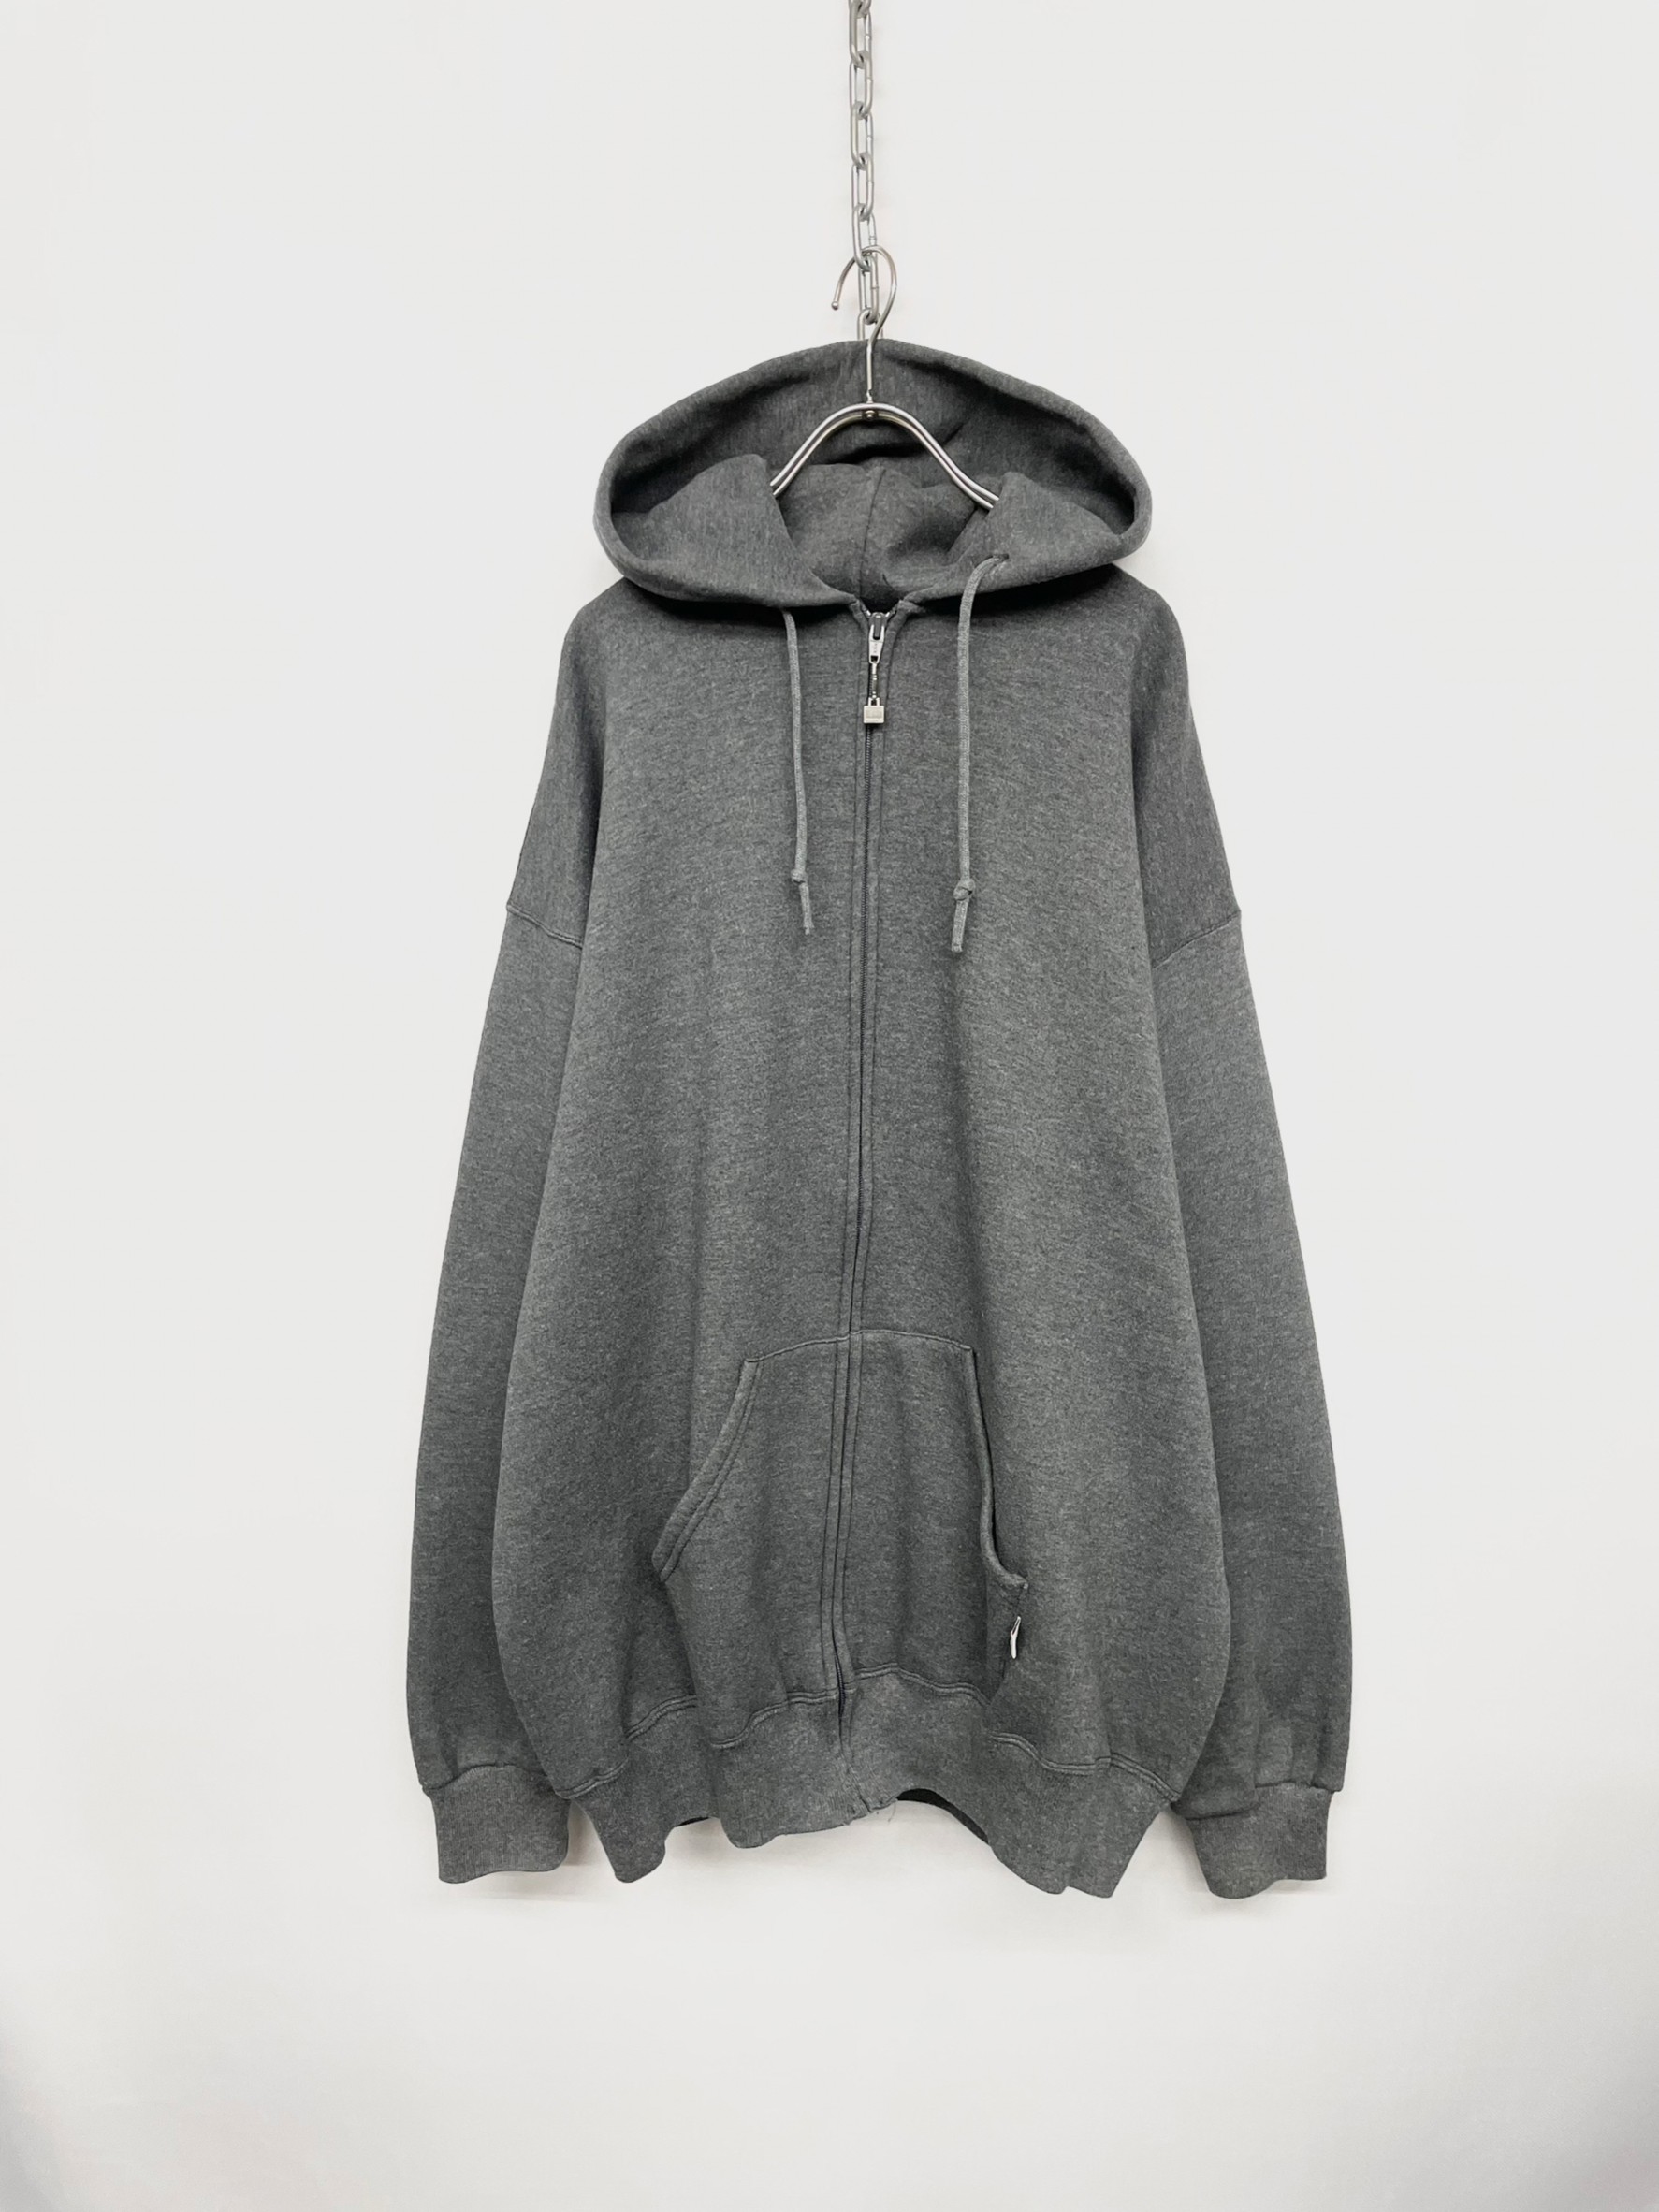 's “RUSSELL” Zip Up HoodieMade in USA   Vintage.City